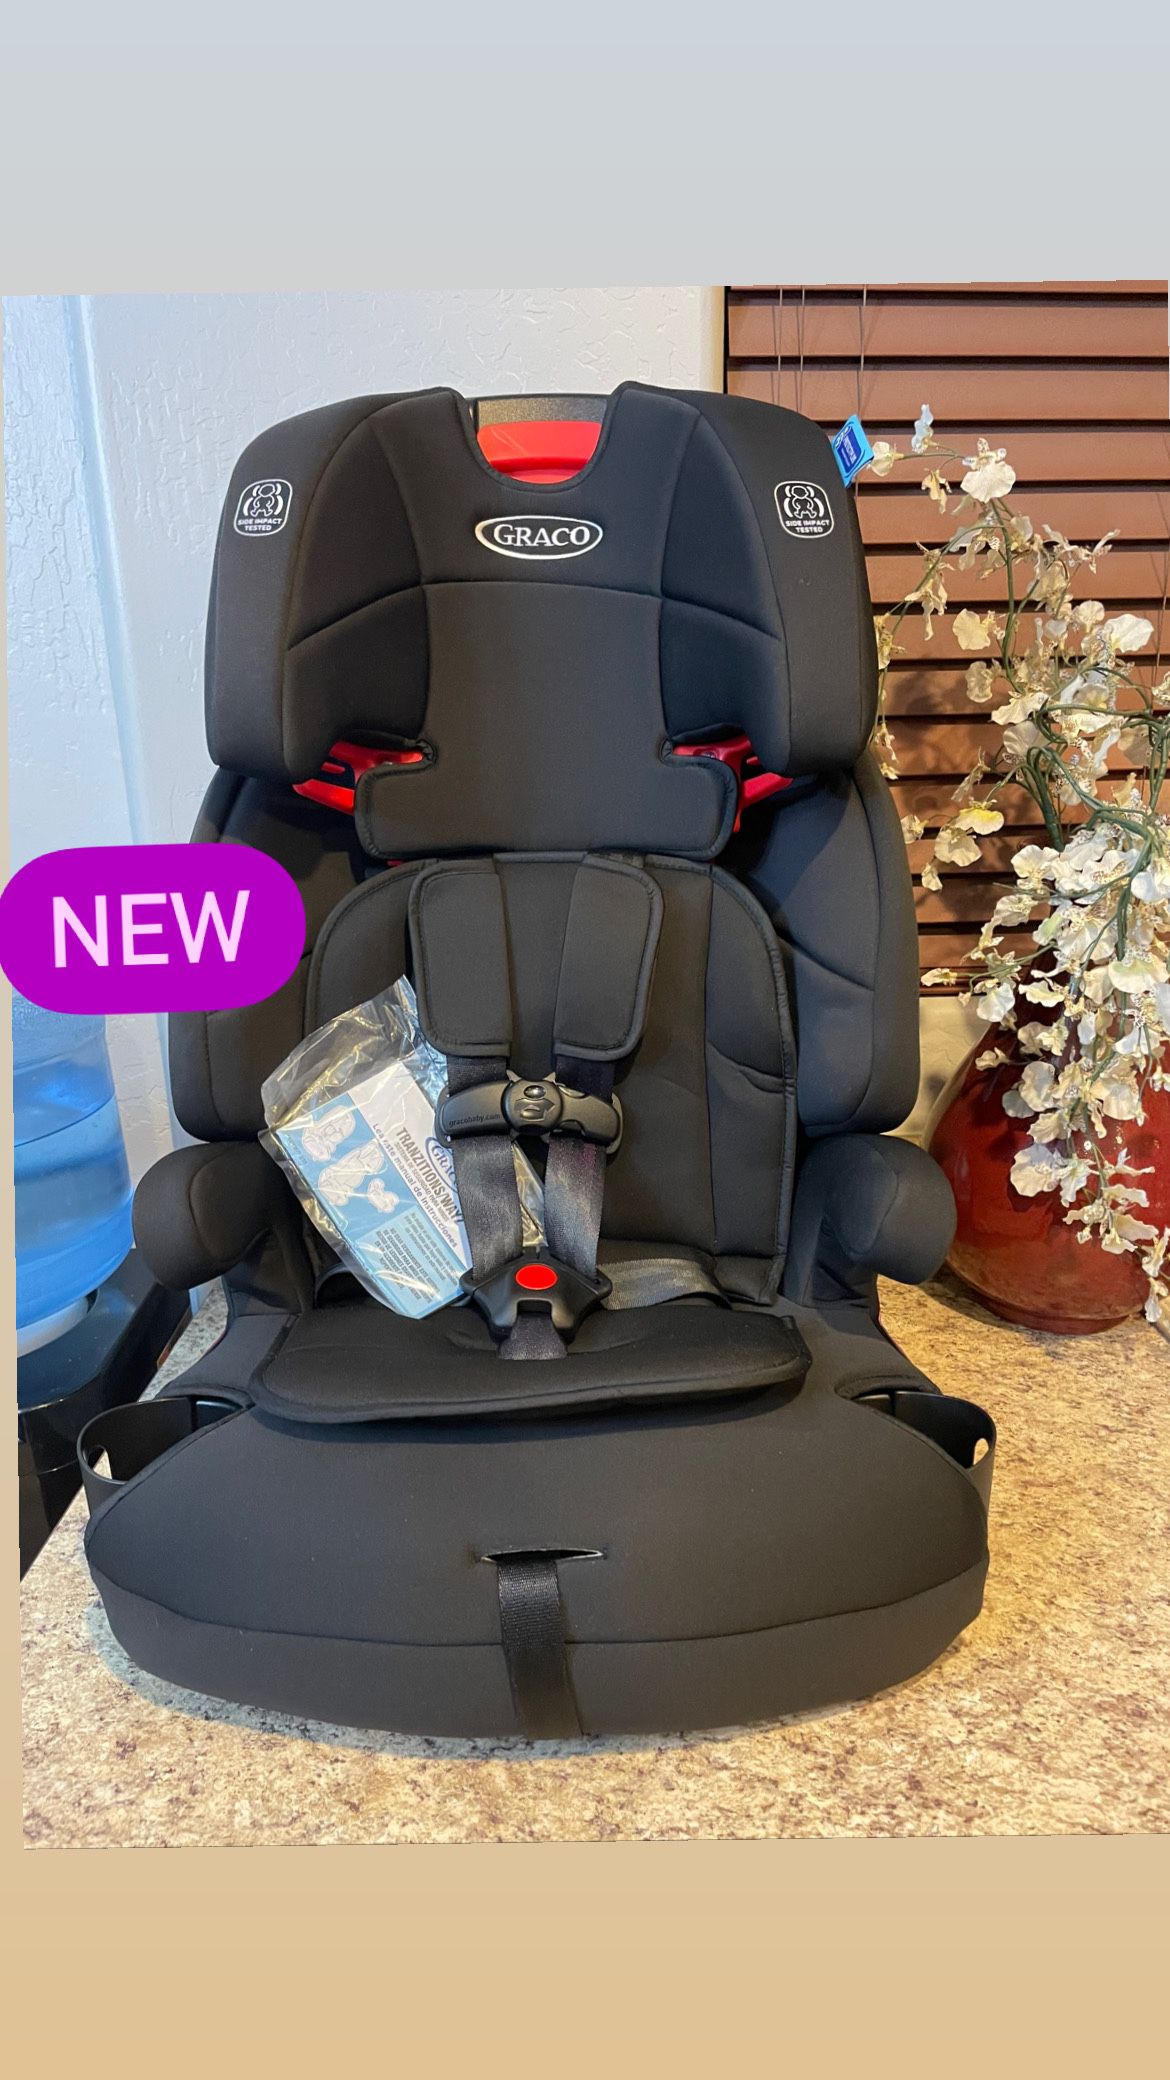 New Graco Tranzitions 3in1 Car Seat